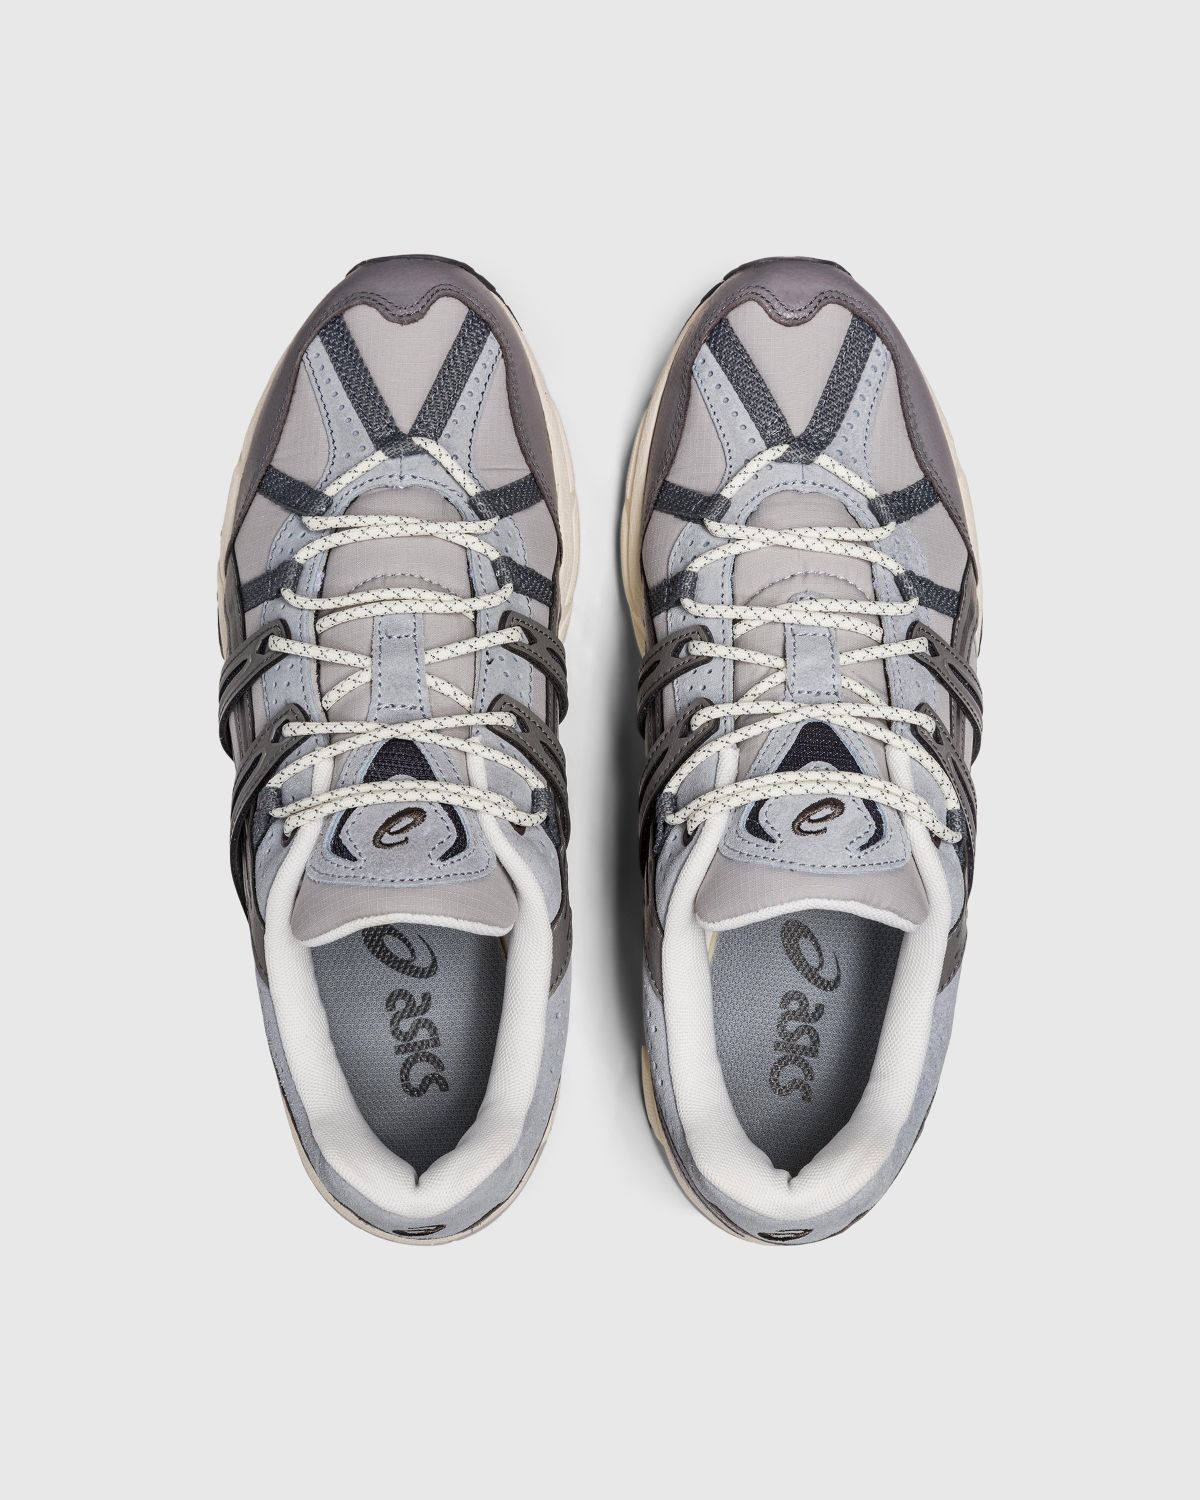 asics – GEL-SONOMA 15-50 Oyster Grey/Clay Grey - Sneakers - Grey - Image 5